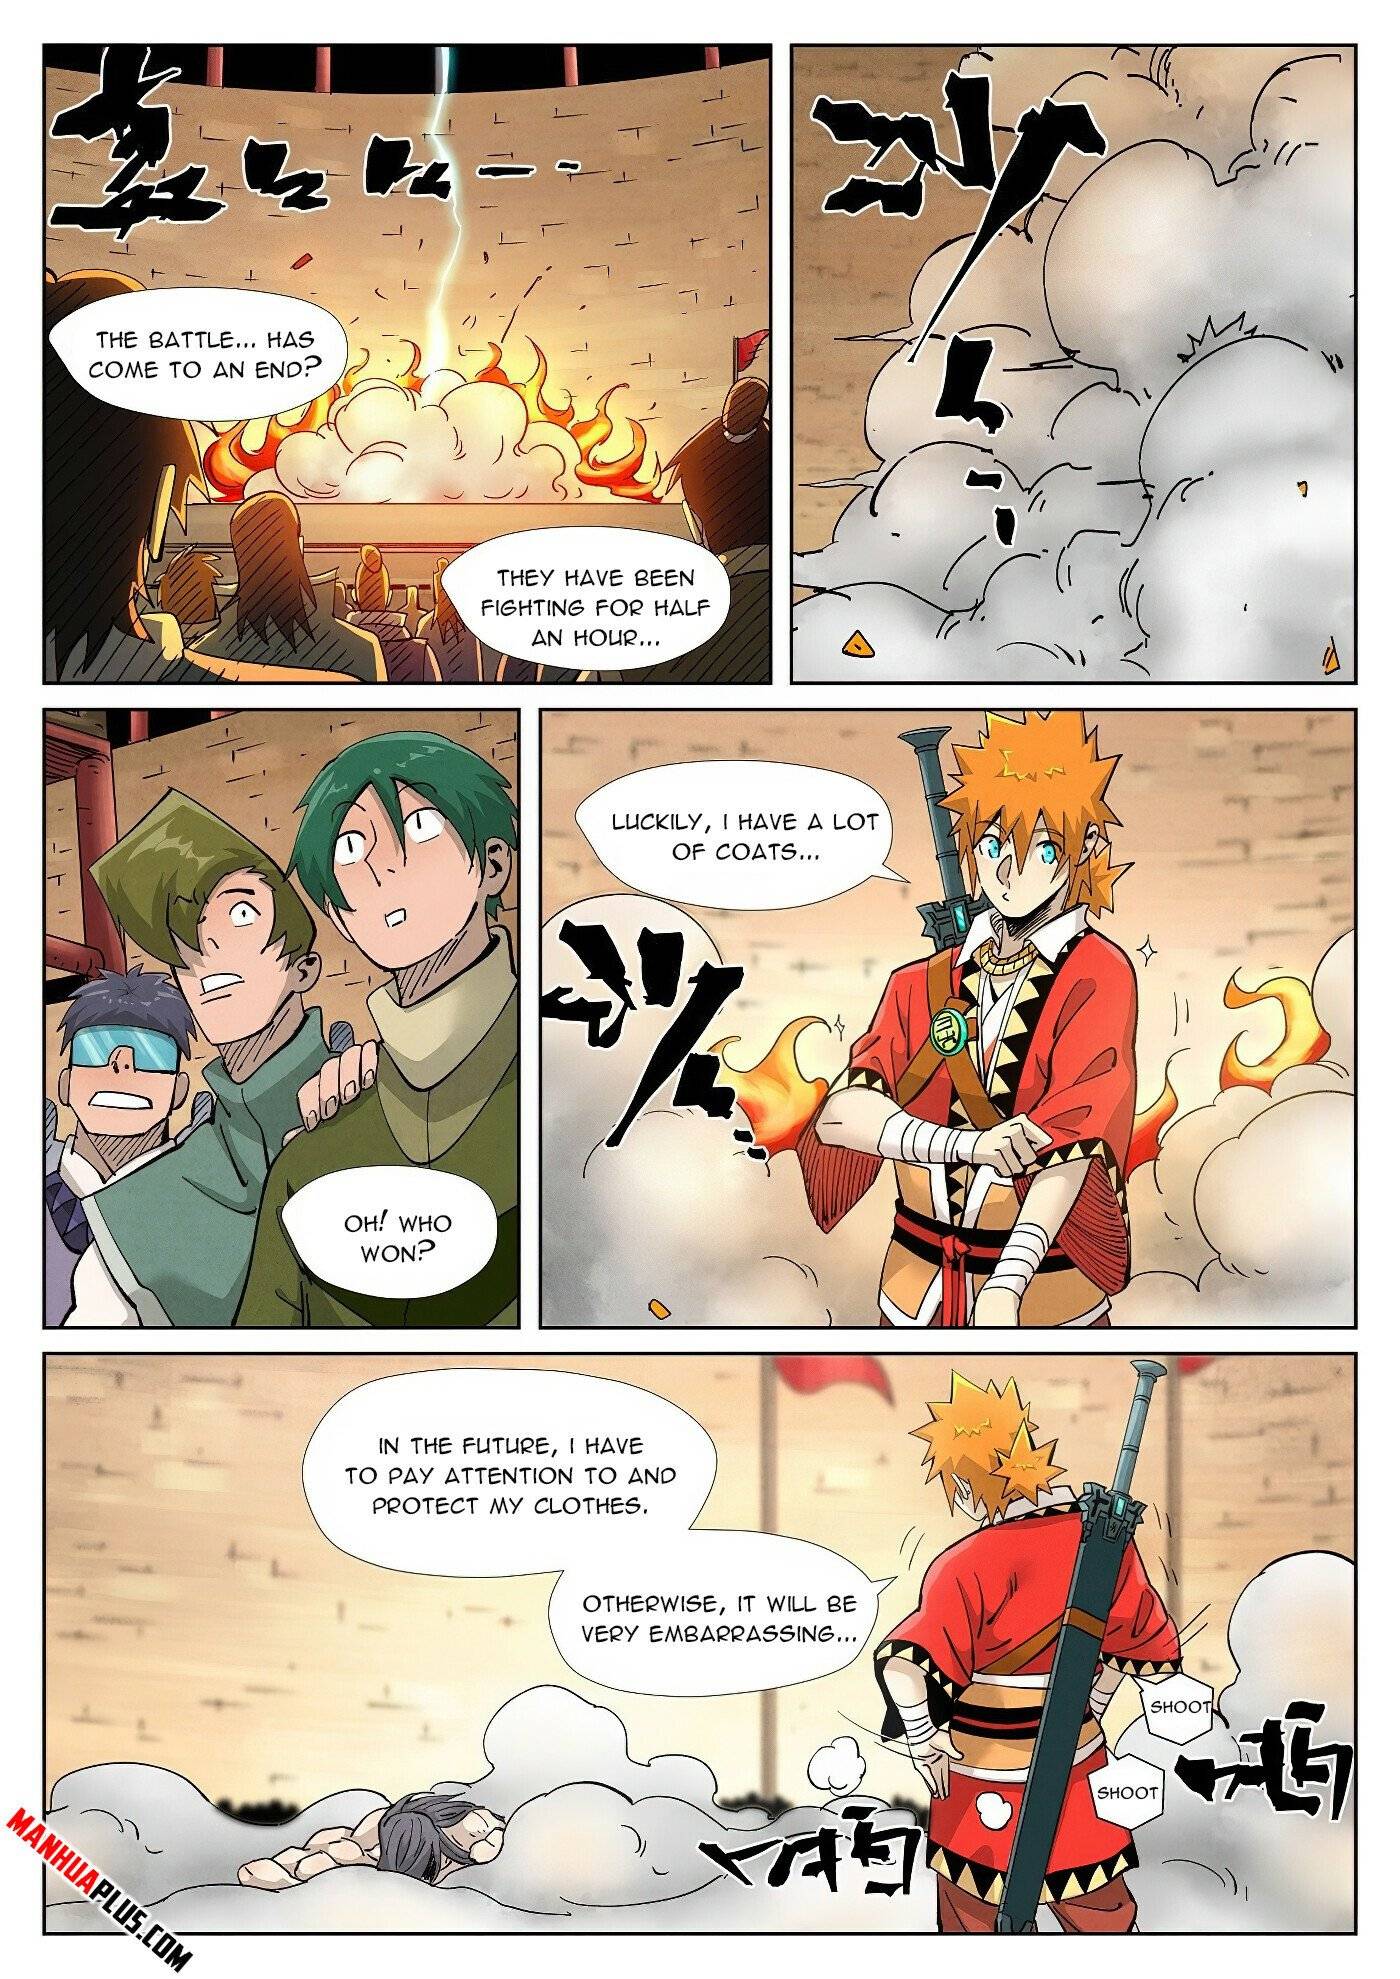 Tales of Demons and Gods Manhua Chapter 370.5 - Page 5